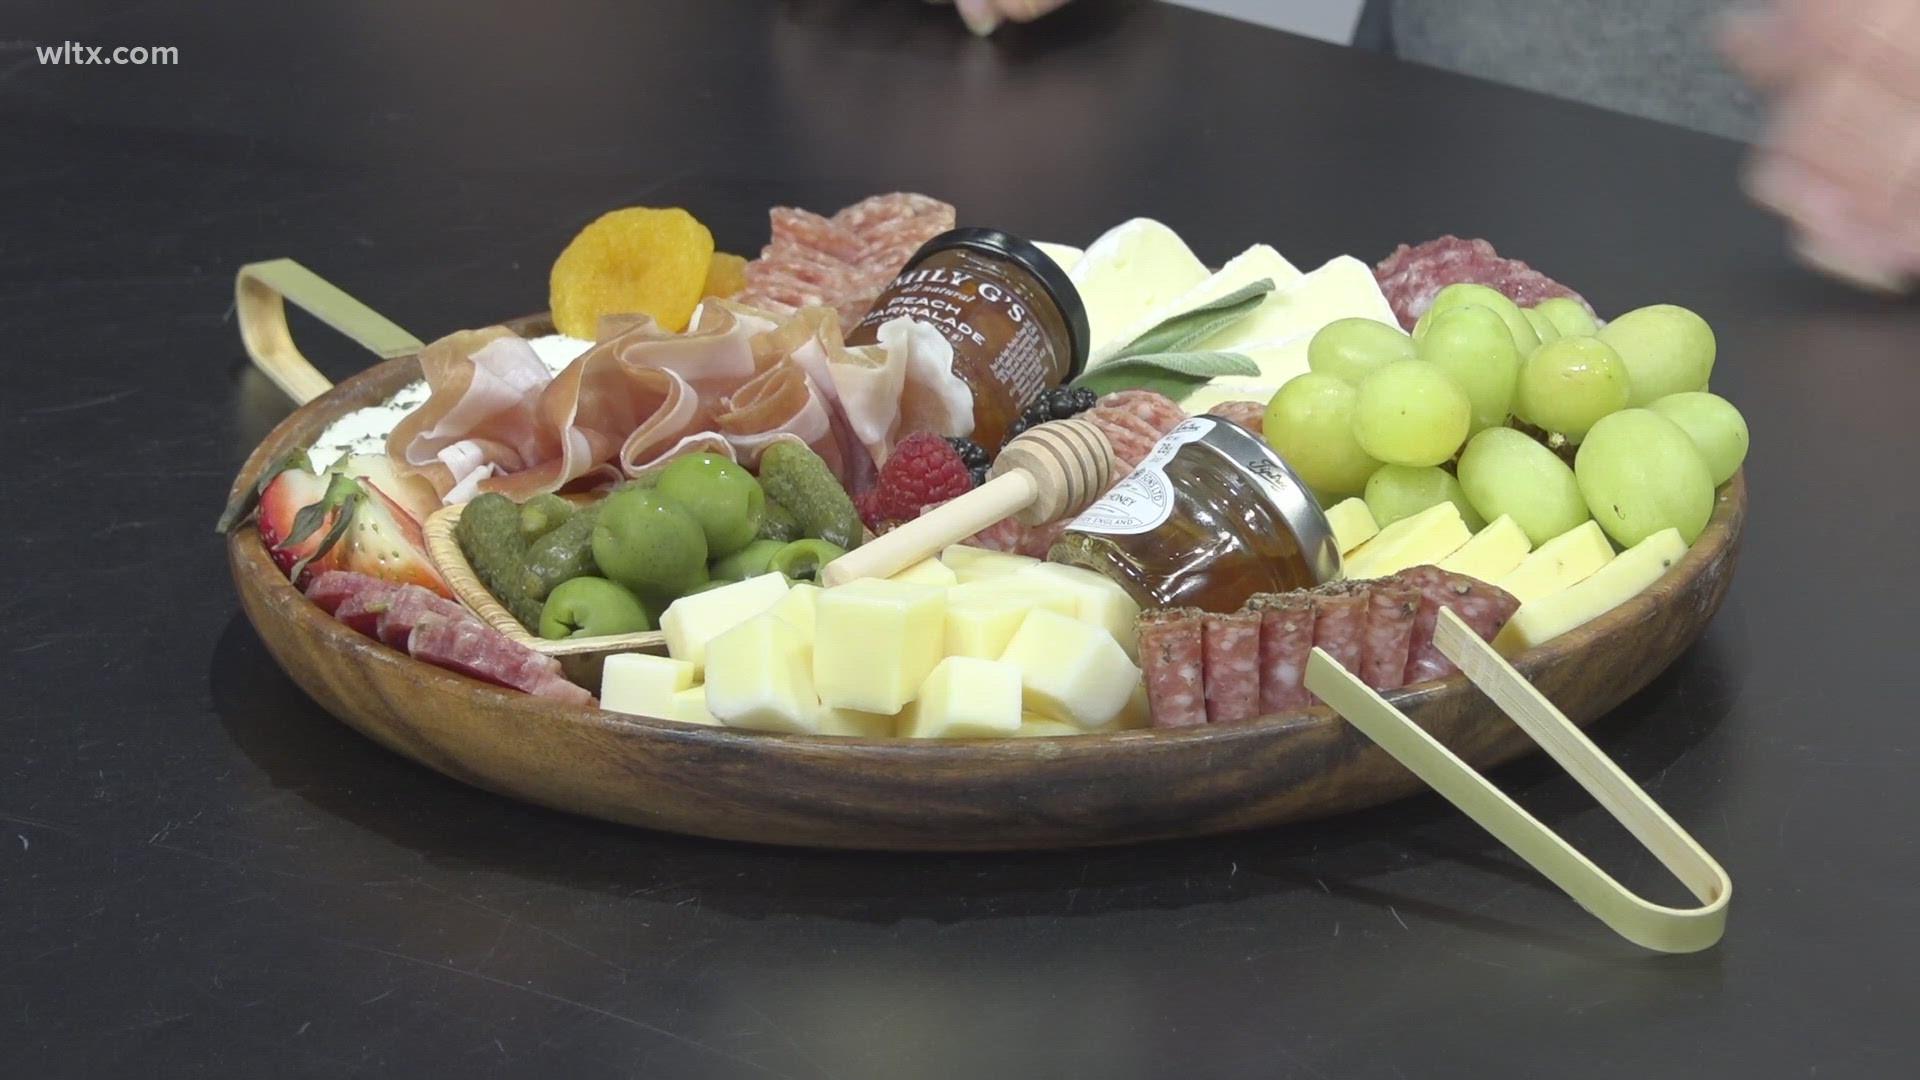 Abundant Graze, a charcuterie business in the Midlands, will be featured during the Columbia Food and Wine Festival